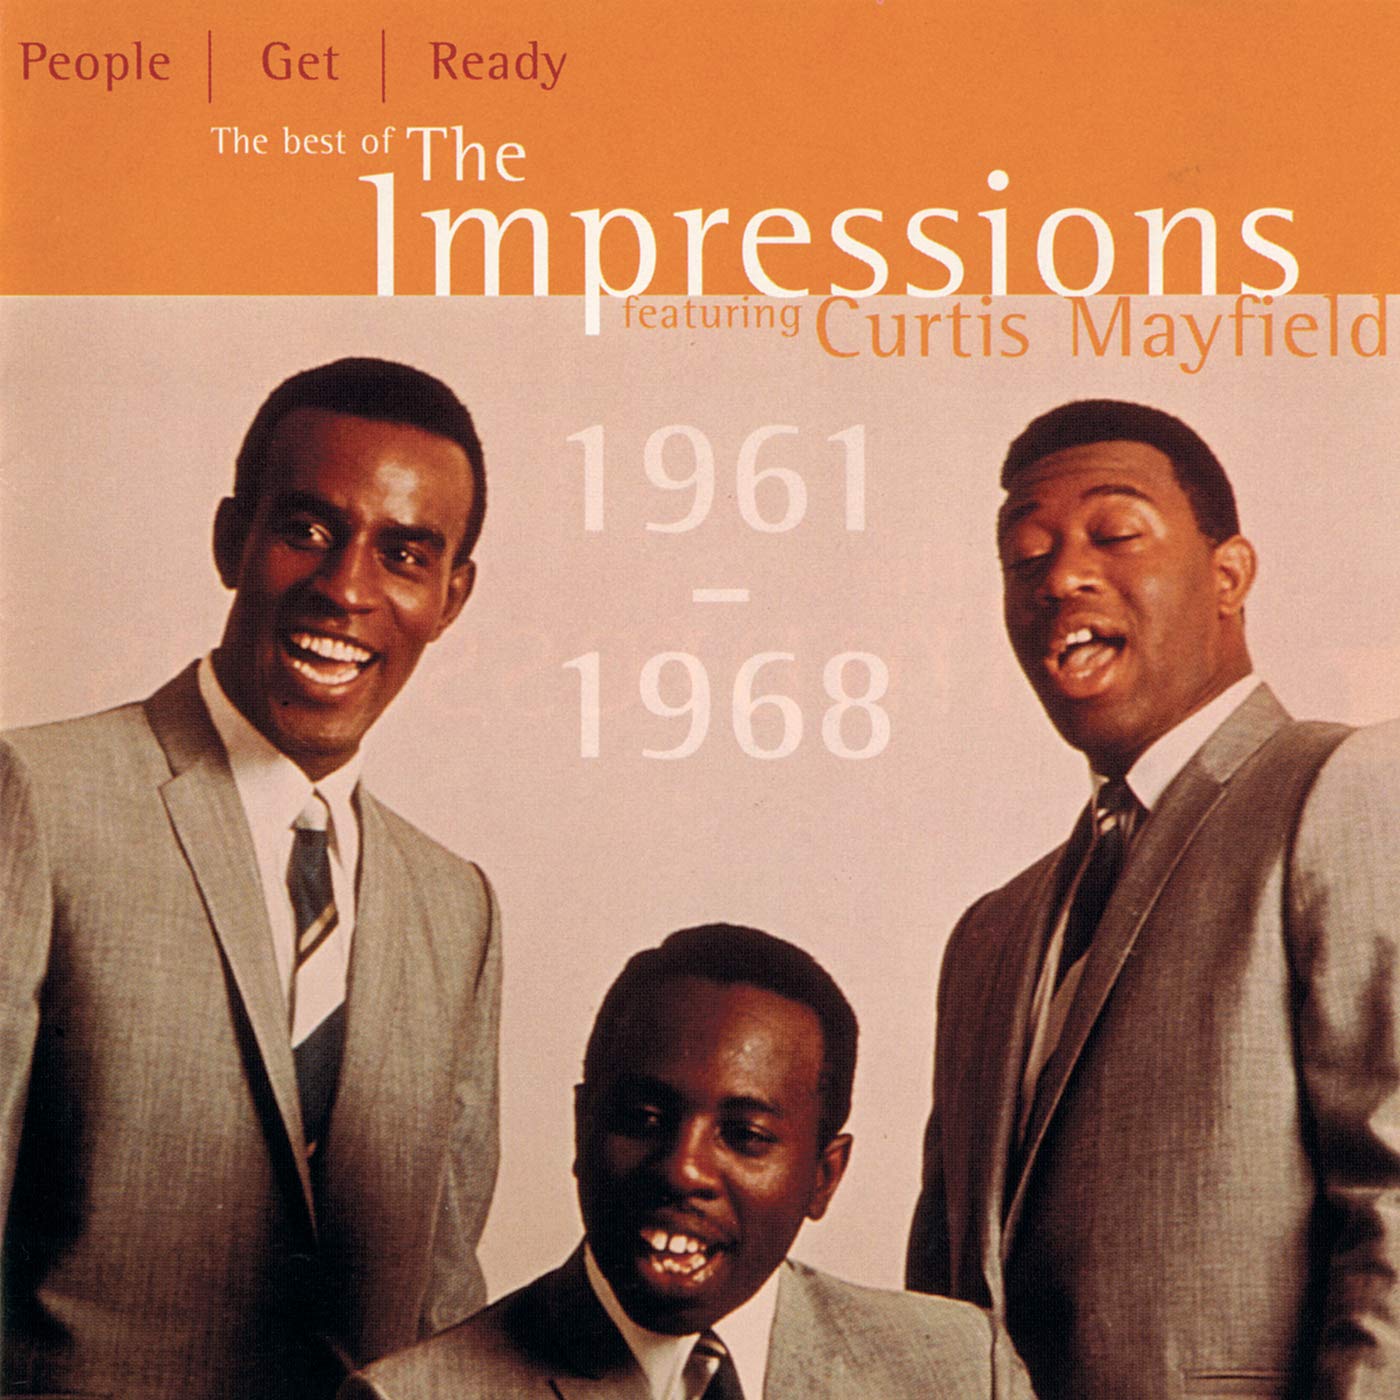 The Impressions Featuring Curtis Mayfield-People Get Ready The Best Of The Impressions-CD-FLAC-1997-THEVOiD Download